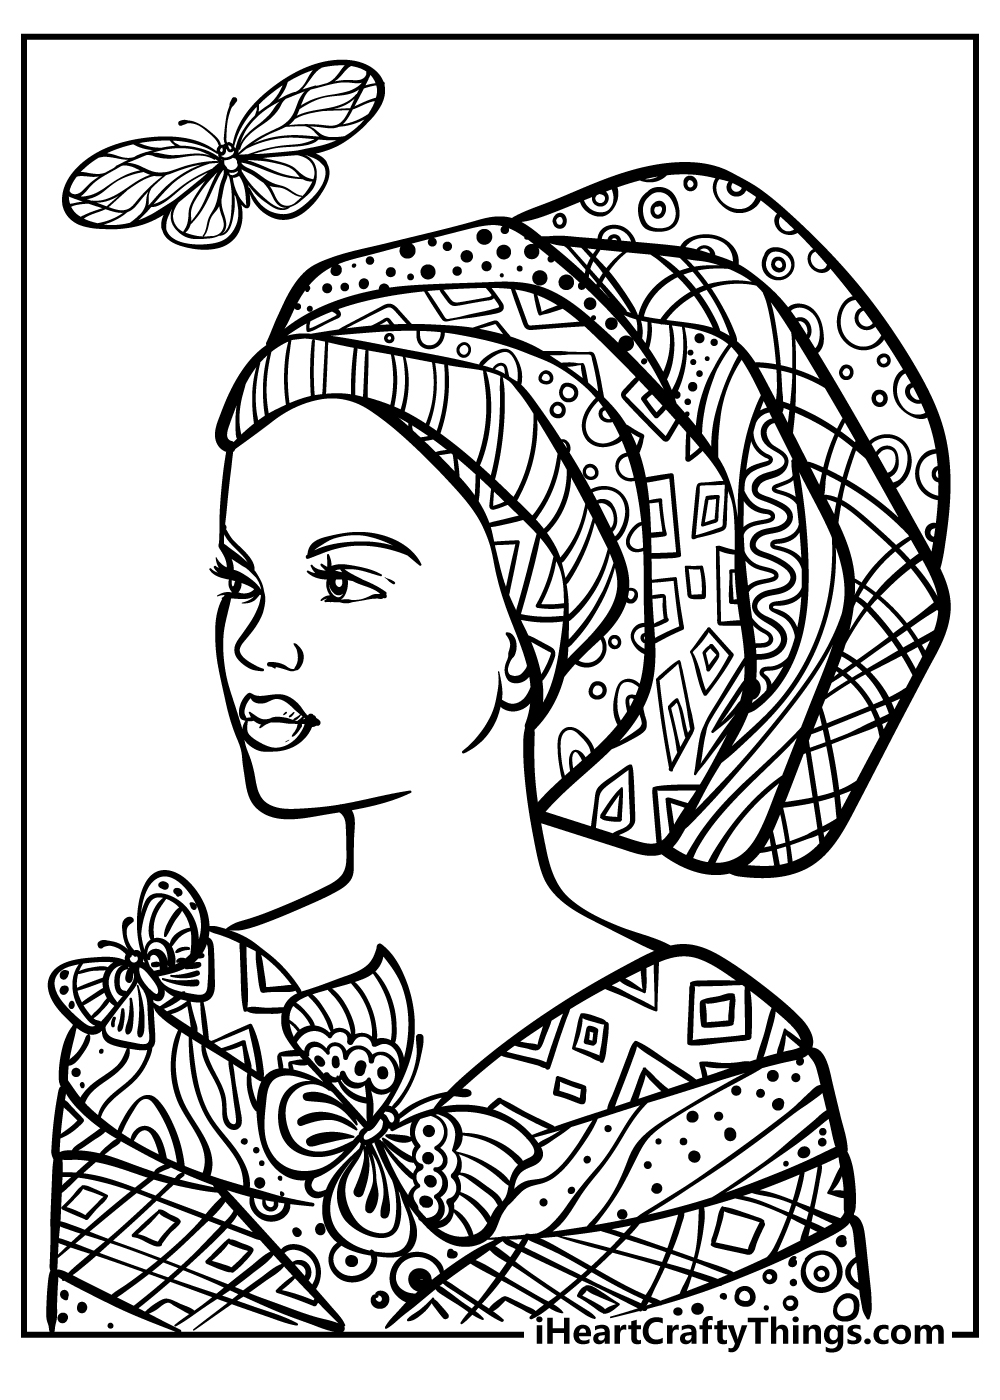 Adult Coloring Pages printable